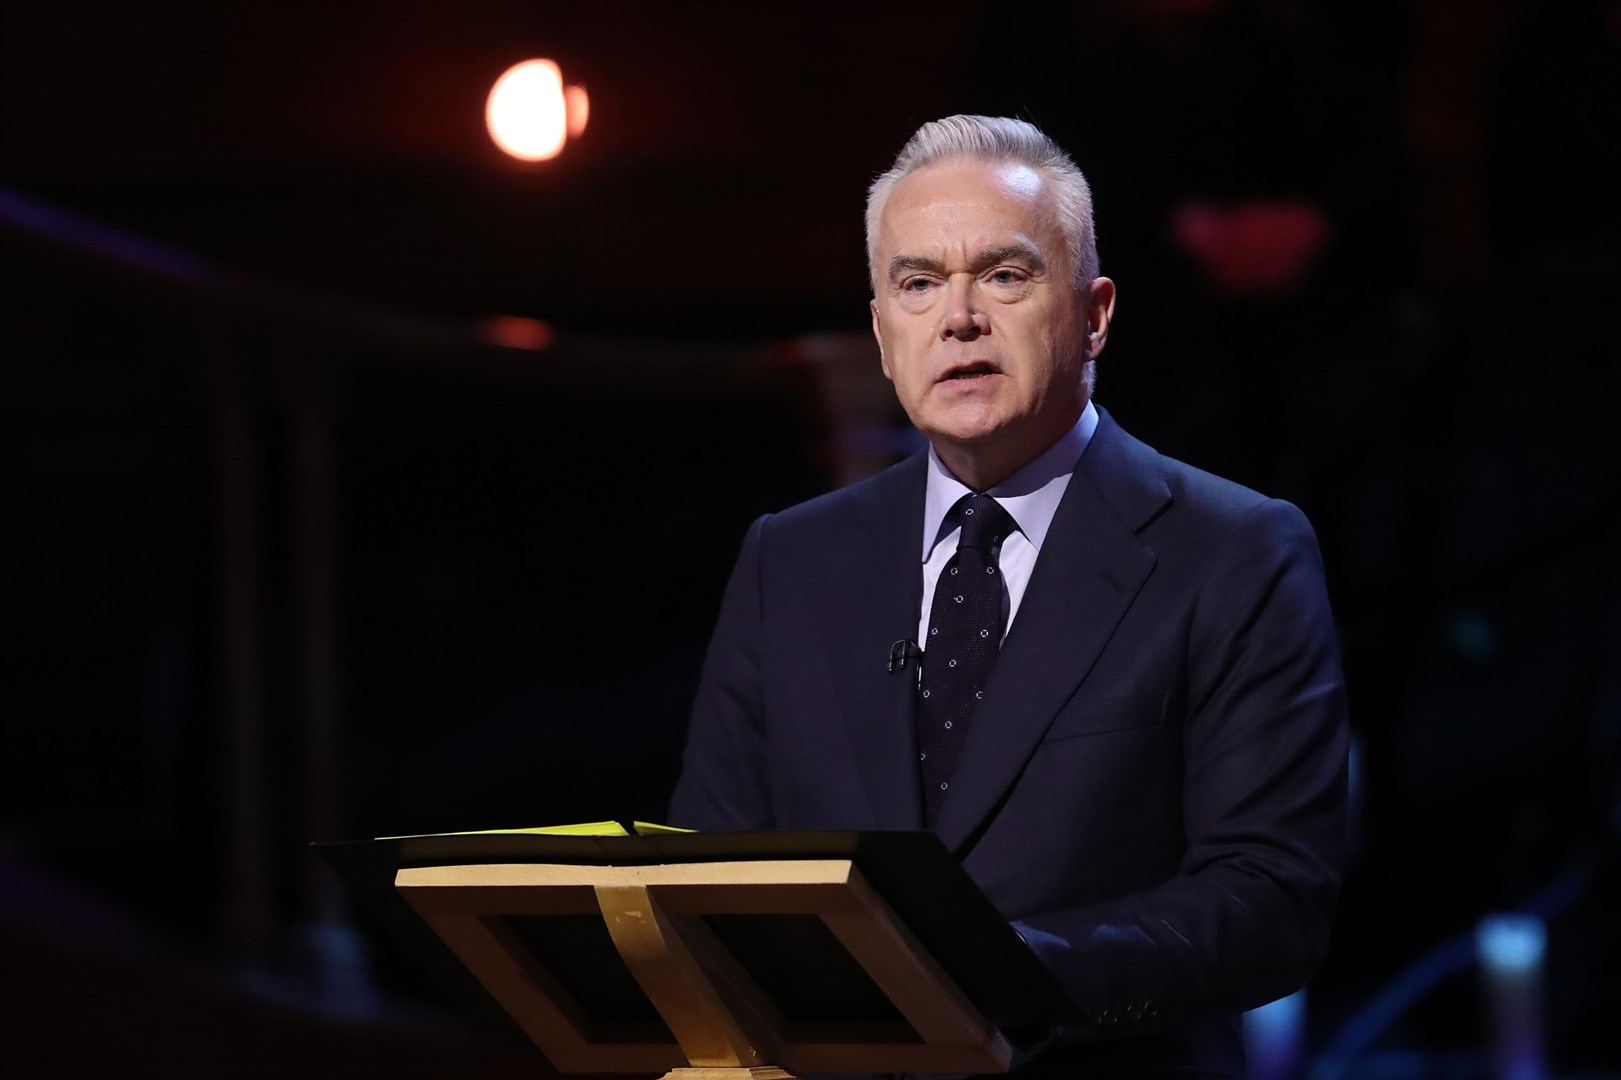 Huw Edwards was suspended by the BBC following allegations he paid a teenager tens of thousands of pounds for sexually-explicit images (Chris Jackson/PA)